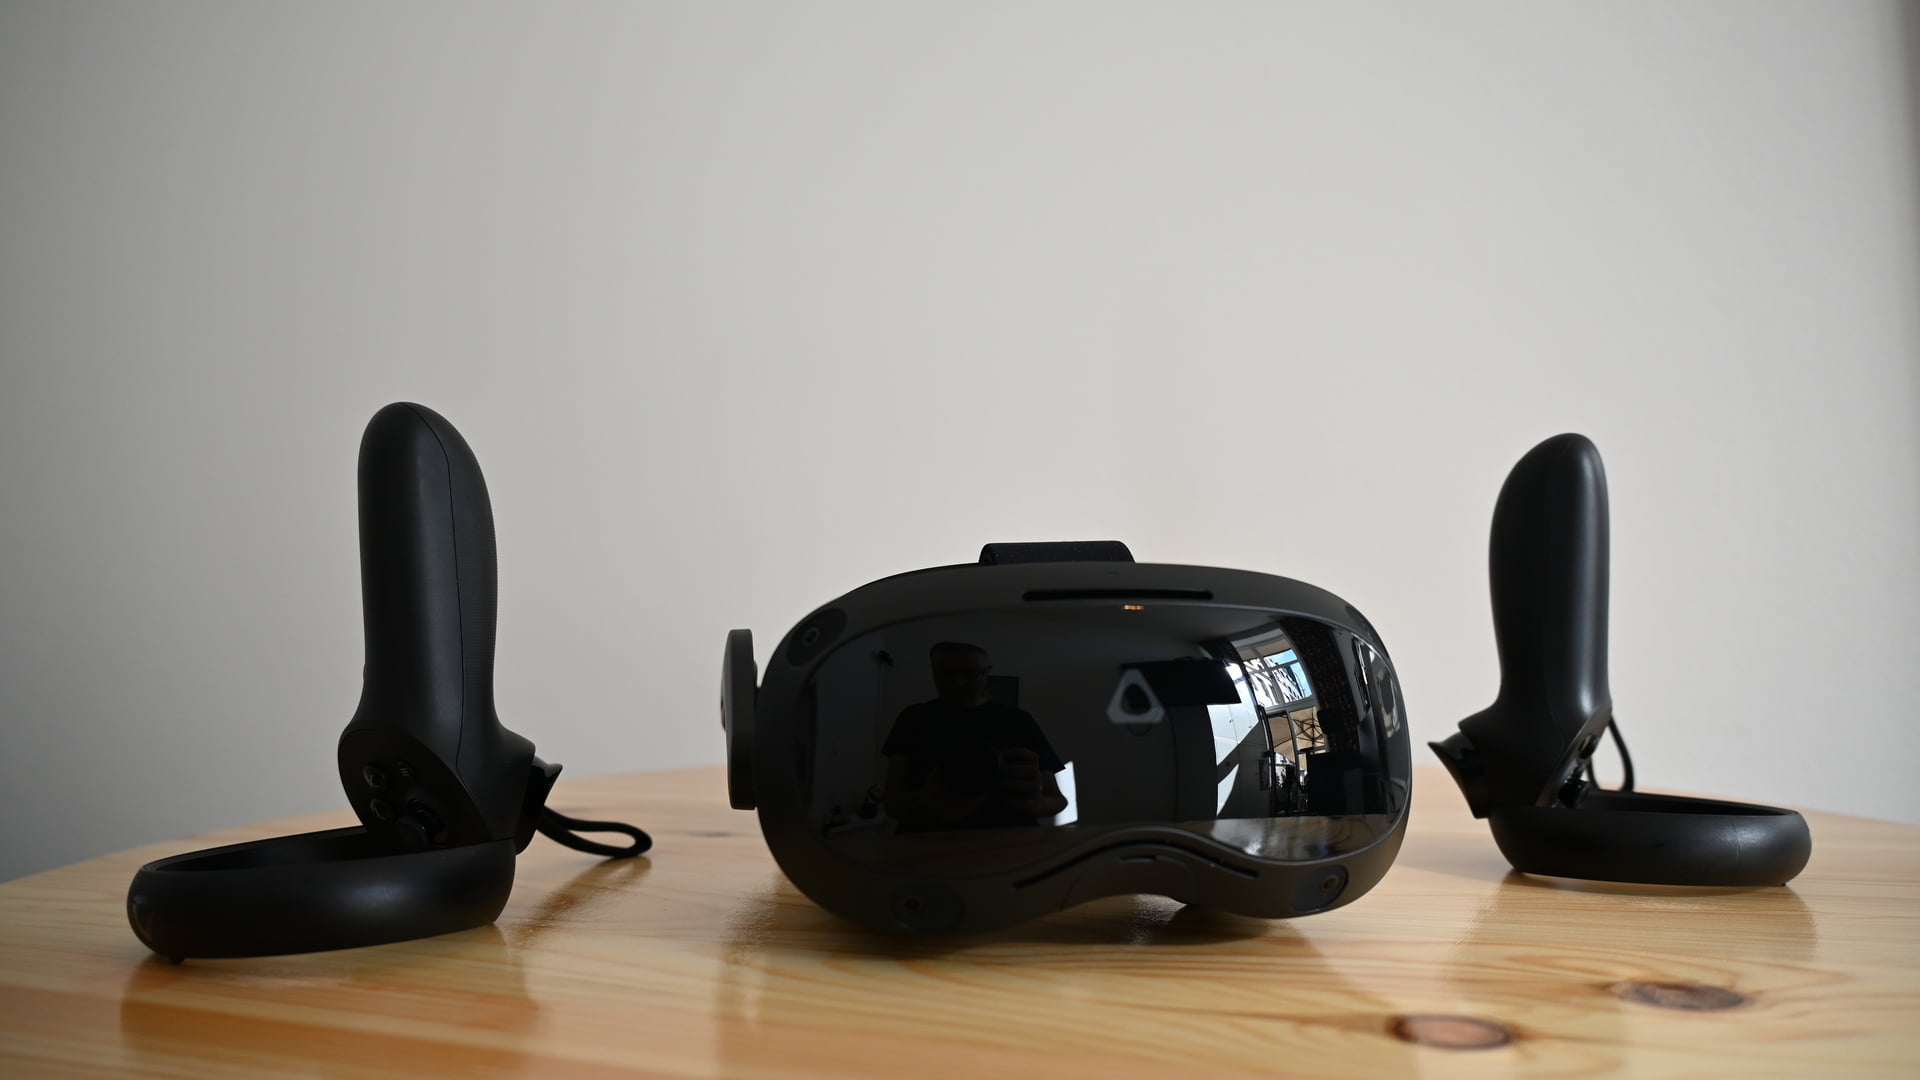 Black VR headset Vive Focus 3 from front on table, flanked by two VR controllers